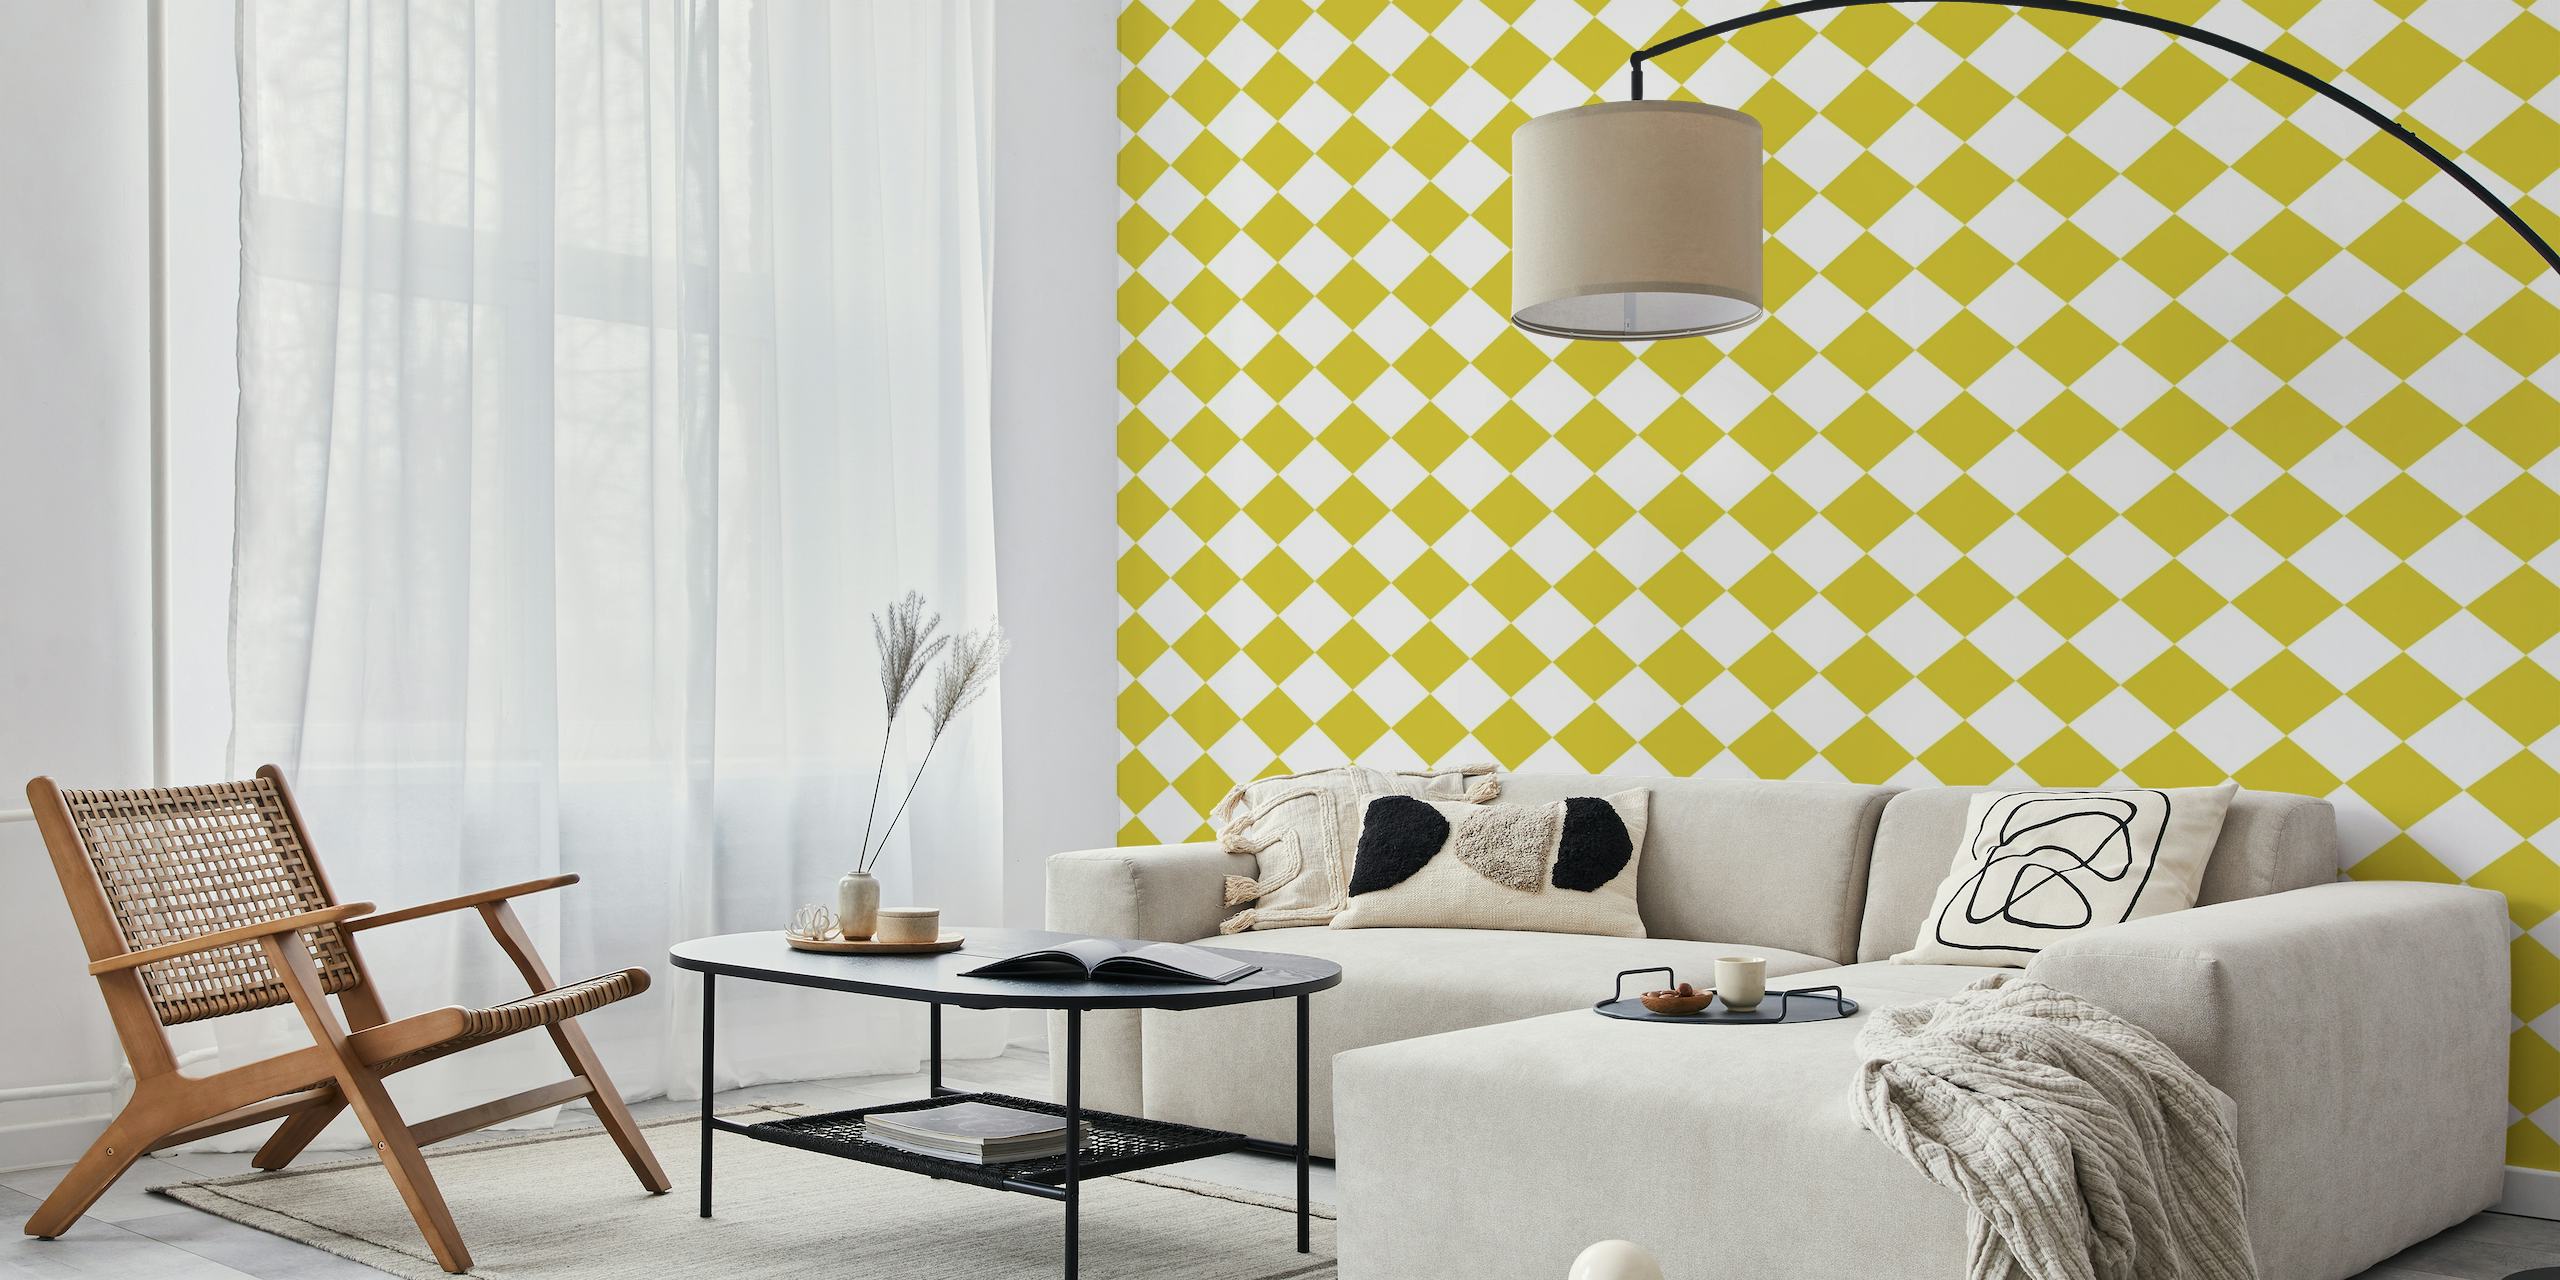 Large yellow and white checkerboard pattern wall mural